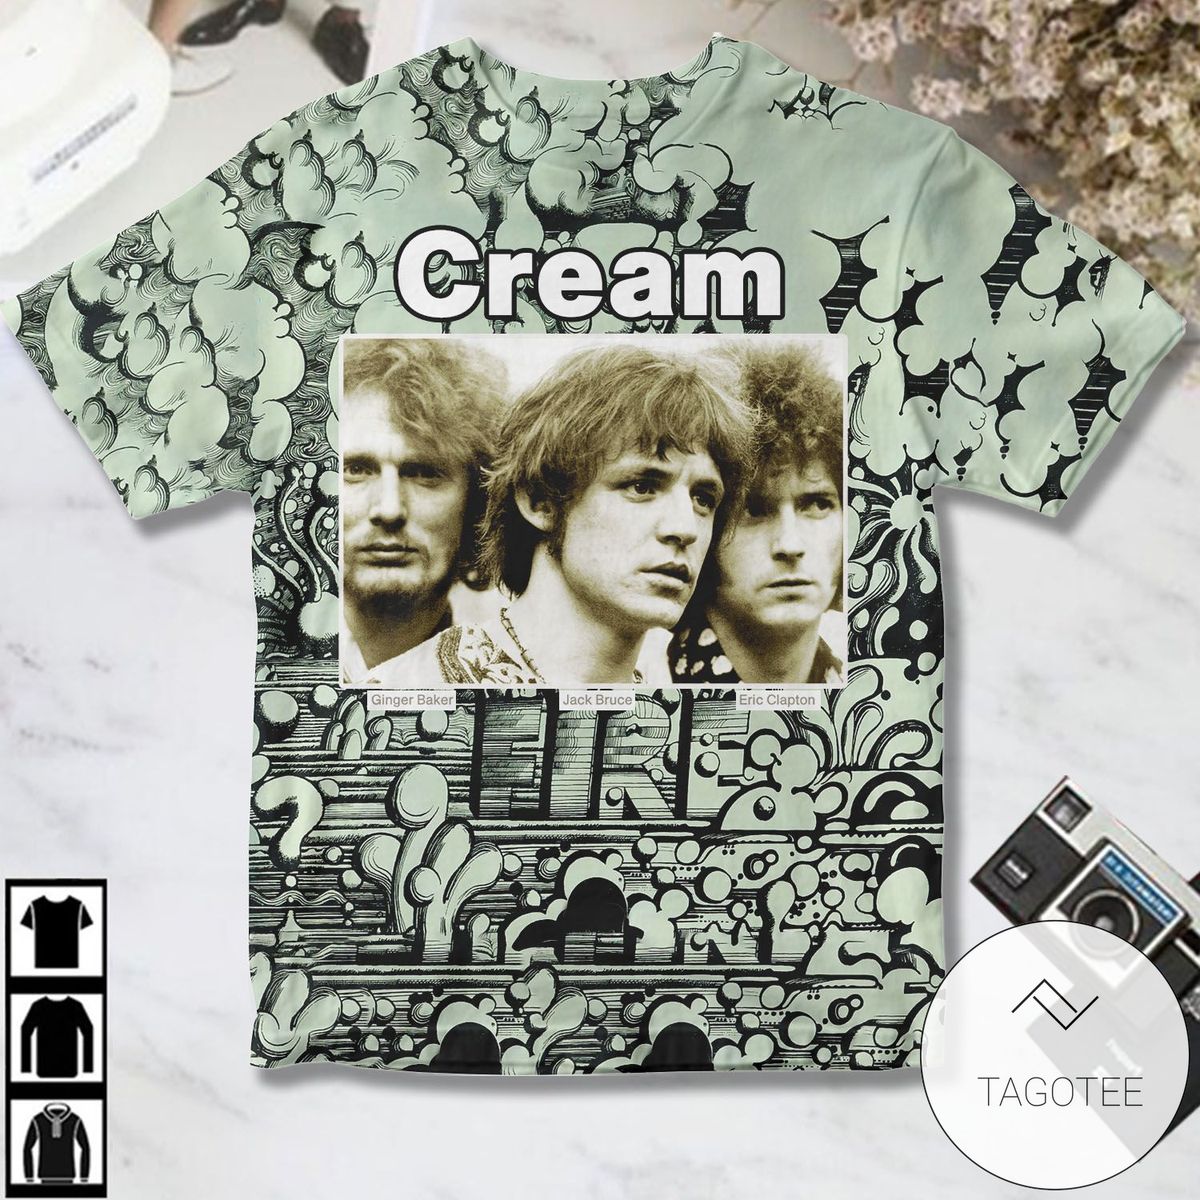 Cream Bbc Sessions And Wheels Of Fire Album Cover Shirt